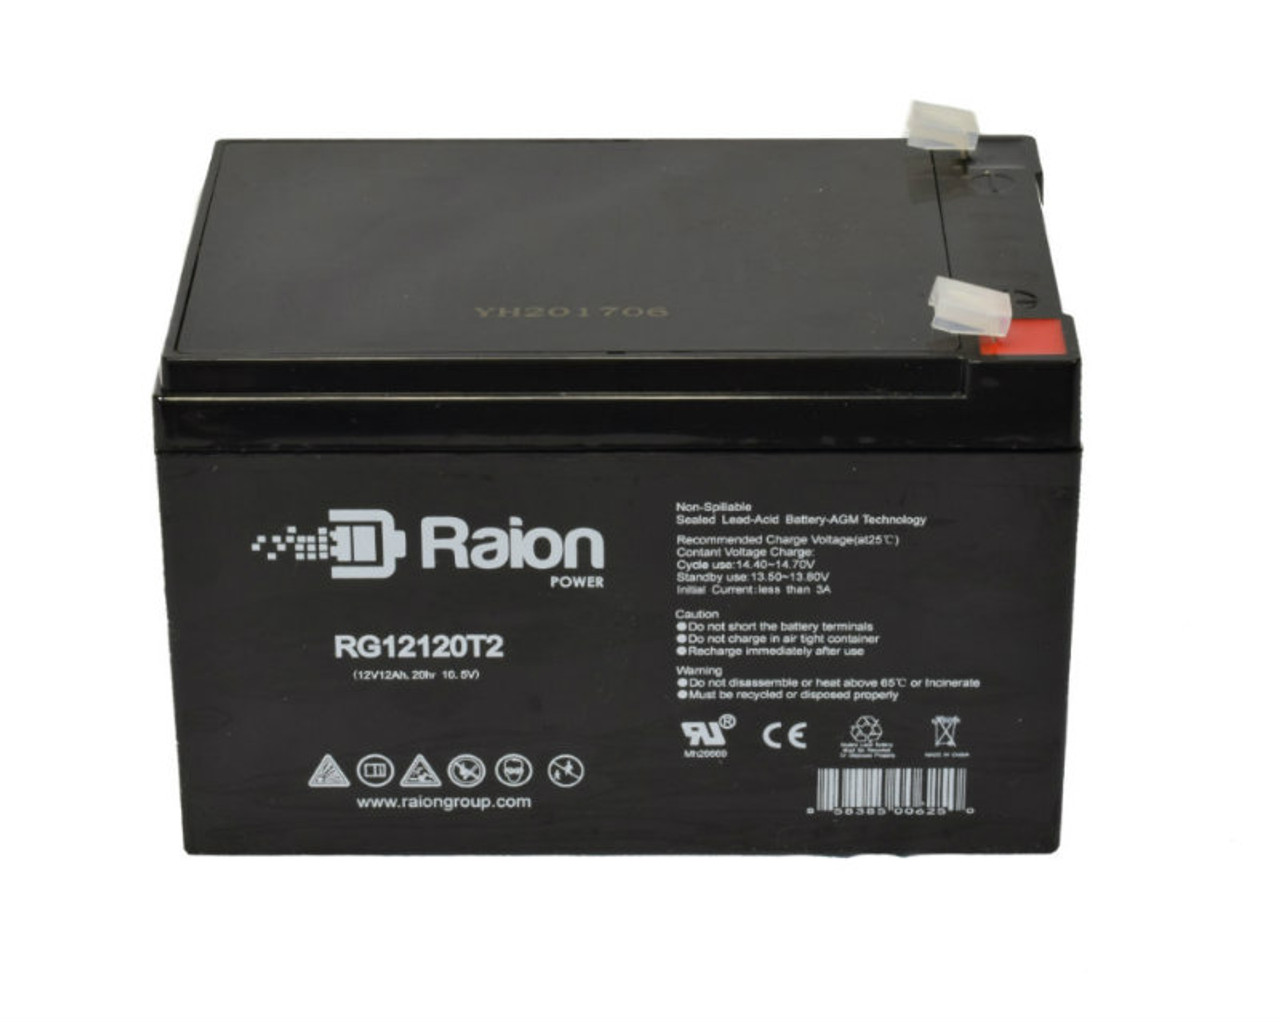 Raion Power RG12120T2 SLA Battery for Bruno Rio 3 Travel Scooter Wheelchairs